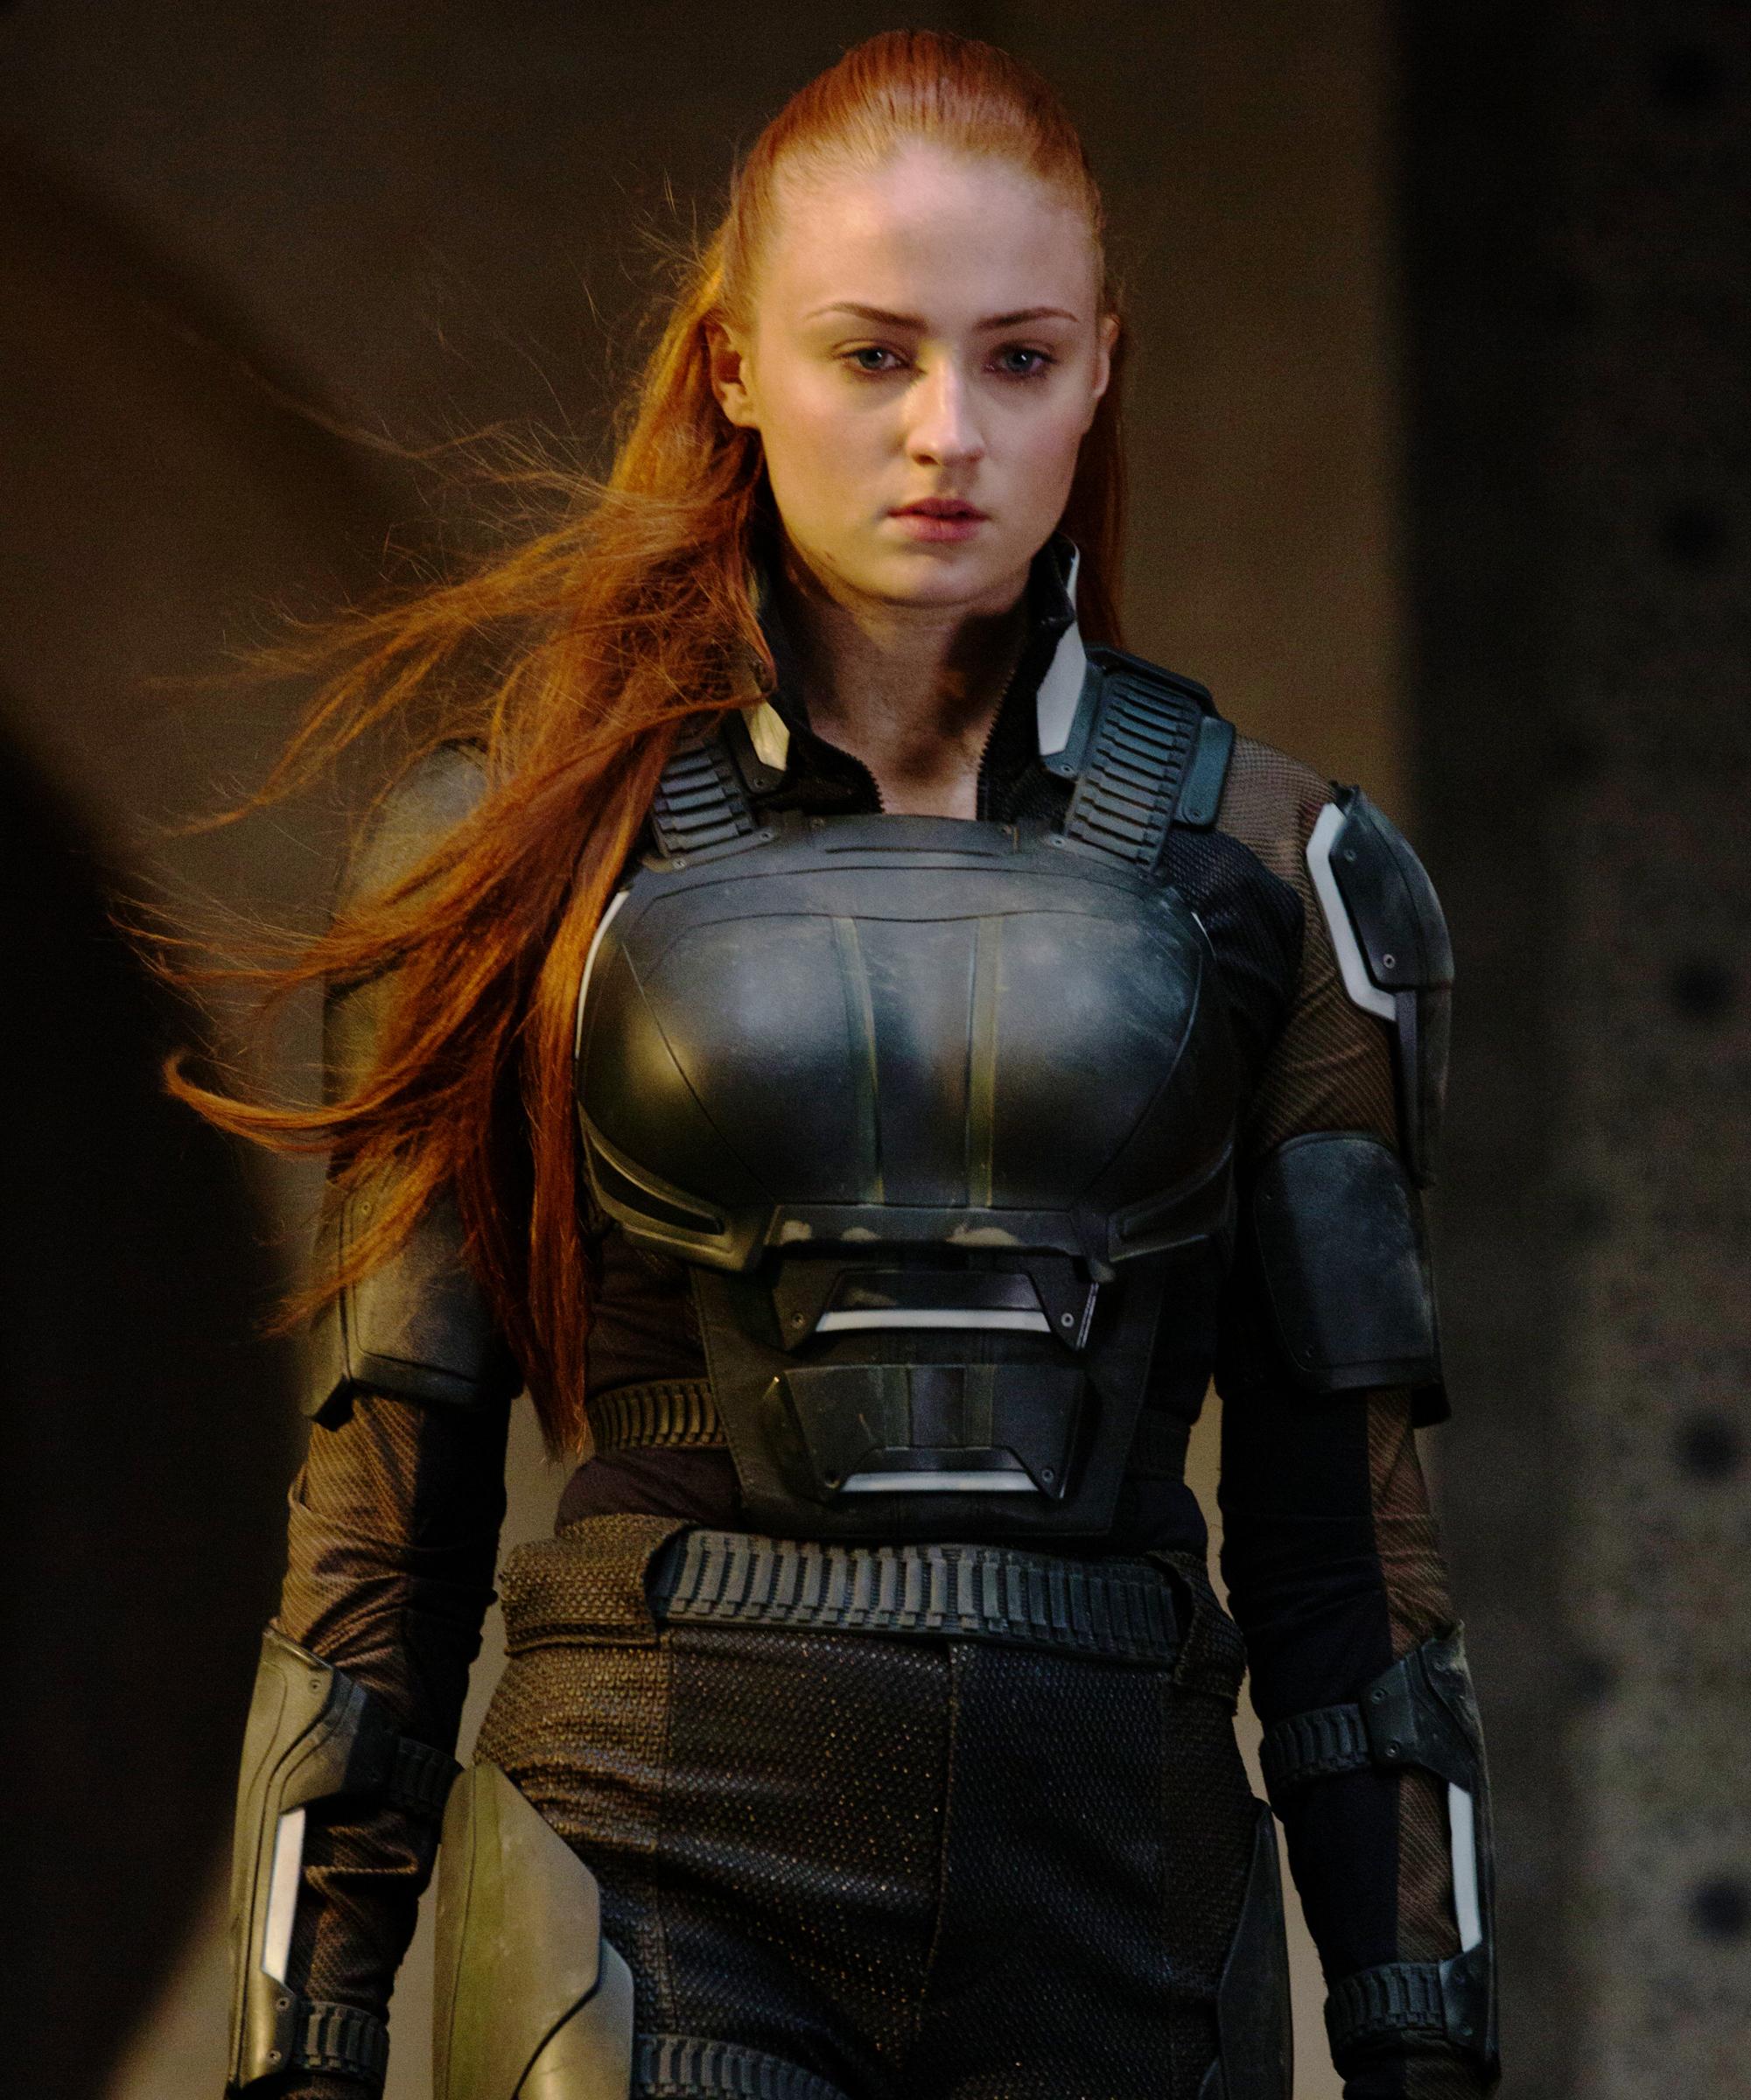 Game of Thrones Sophie Turner the eldest daughter of the Stark